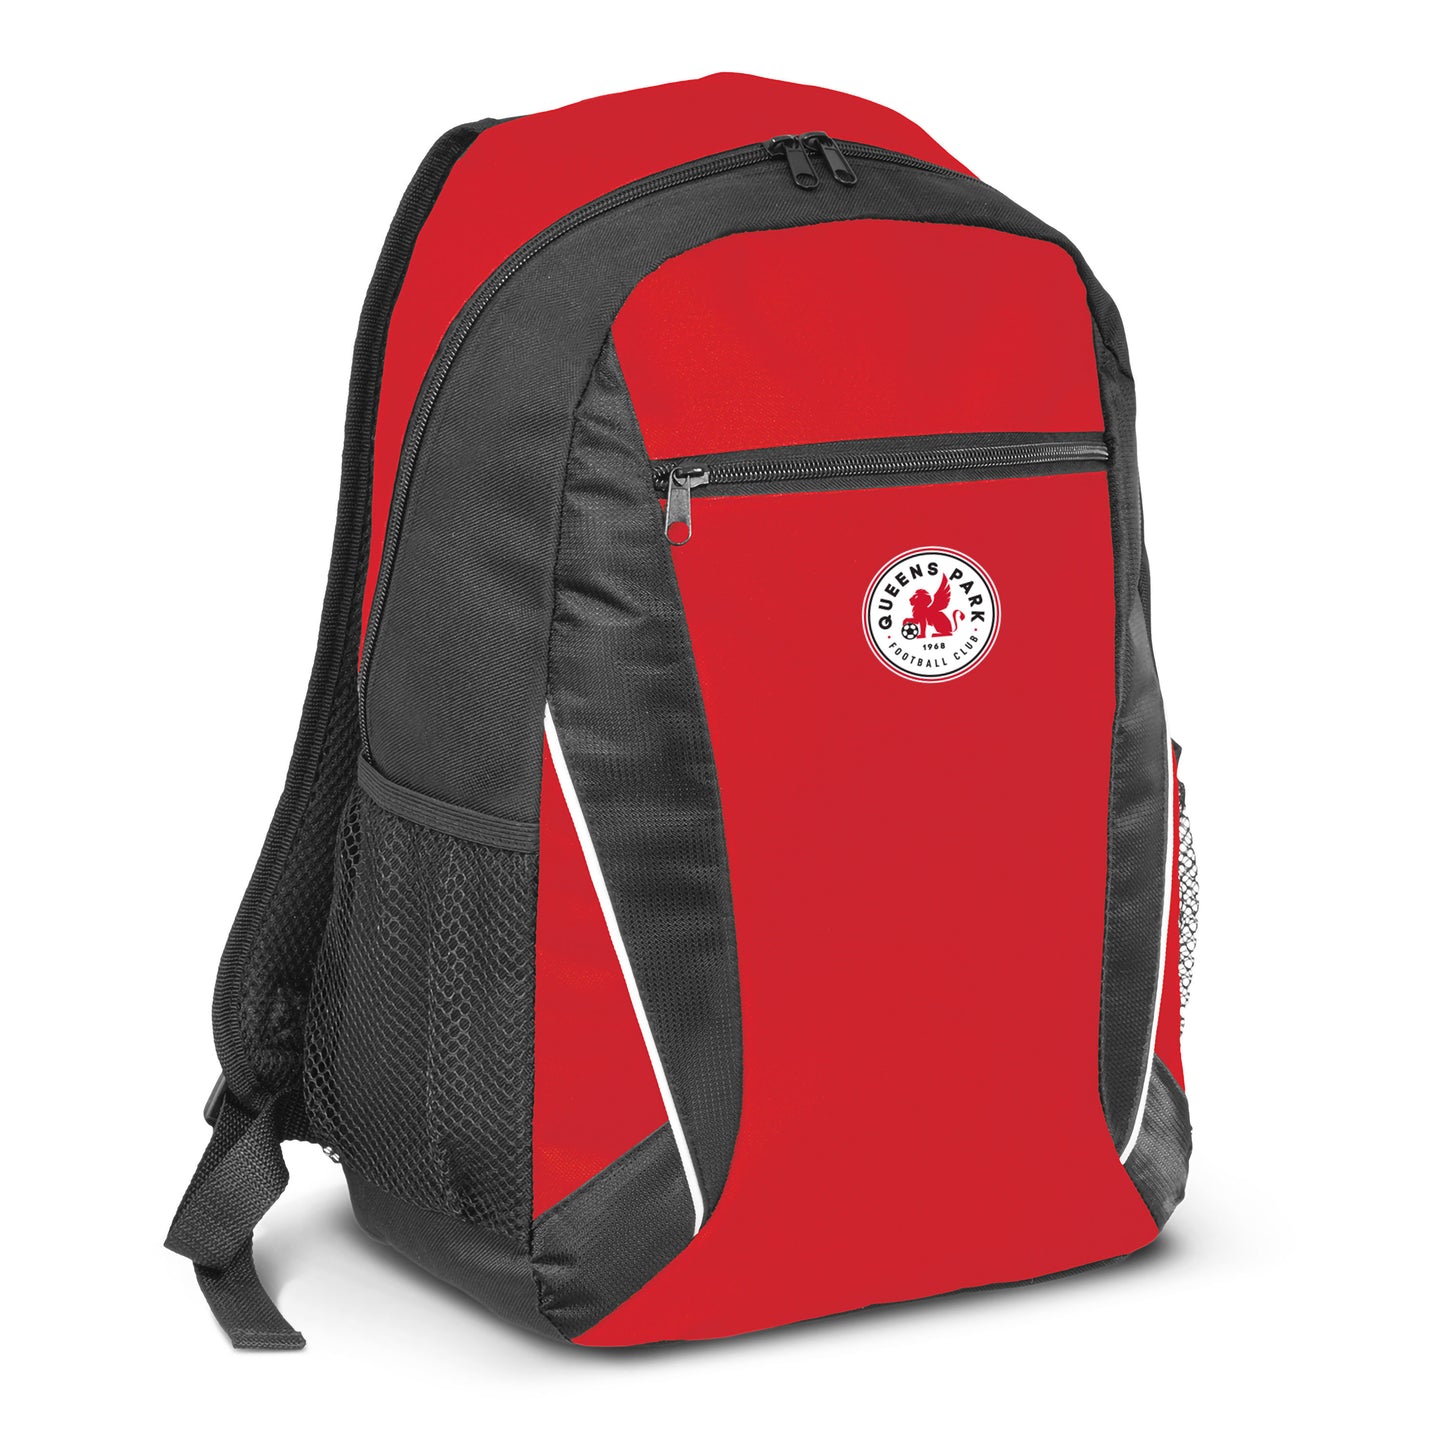 QPFC Backpack